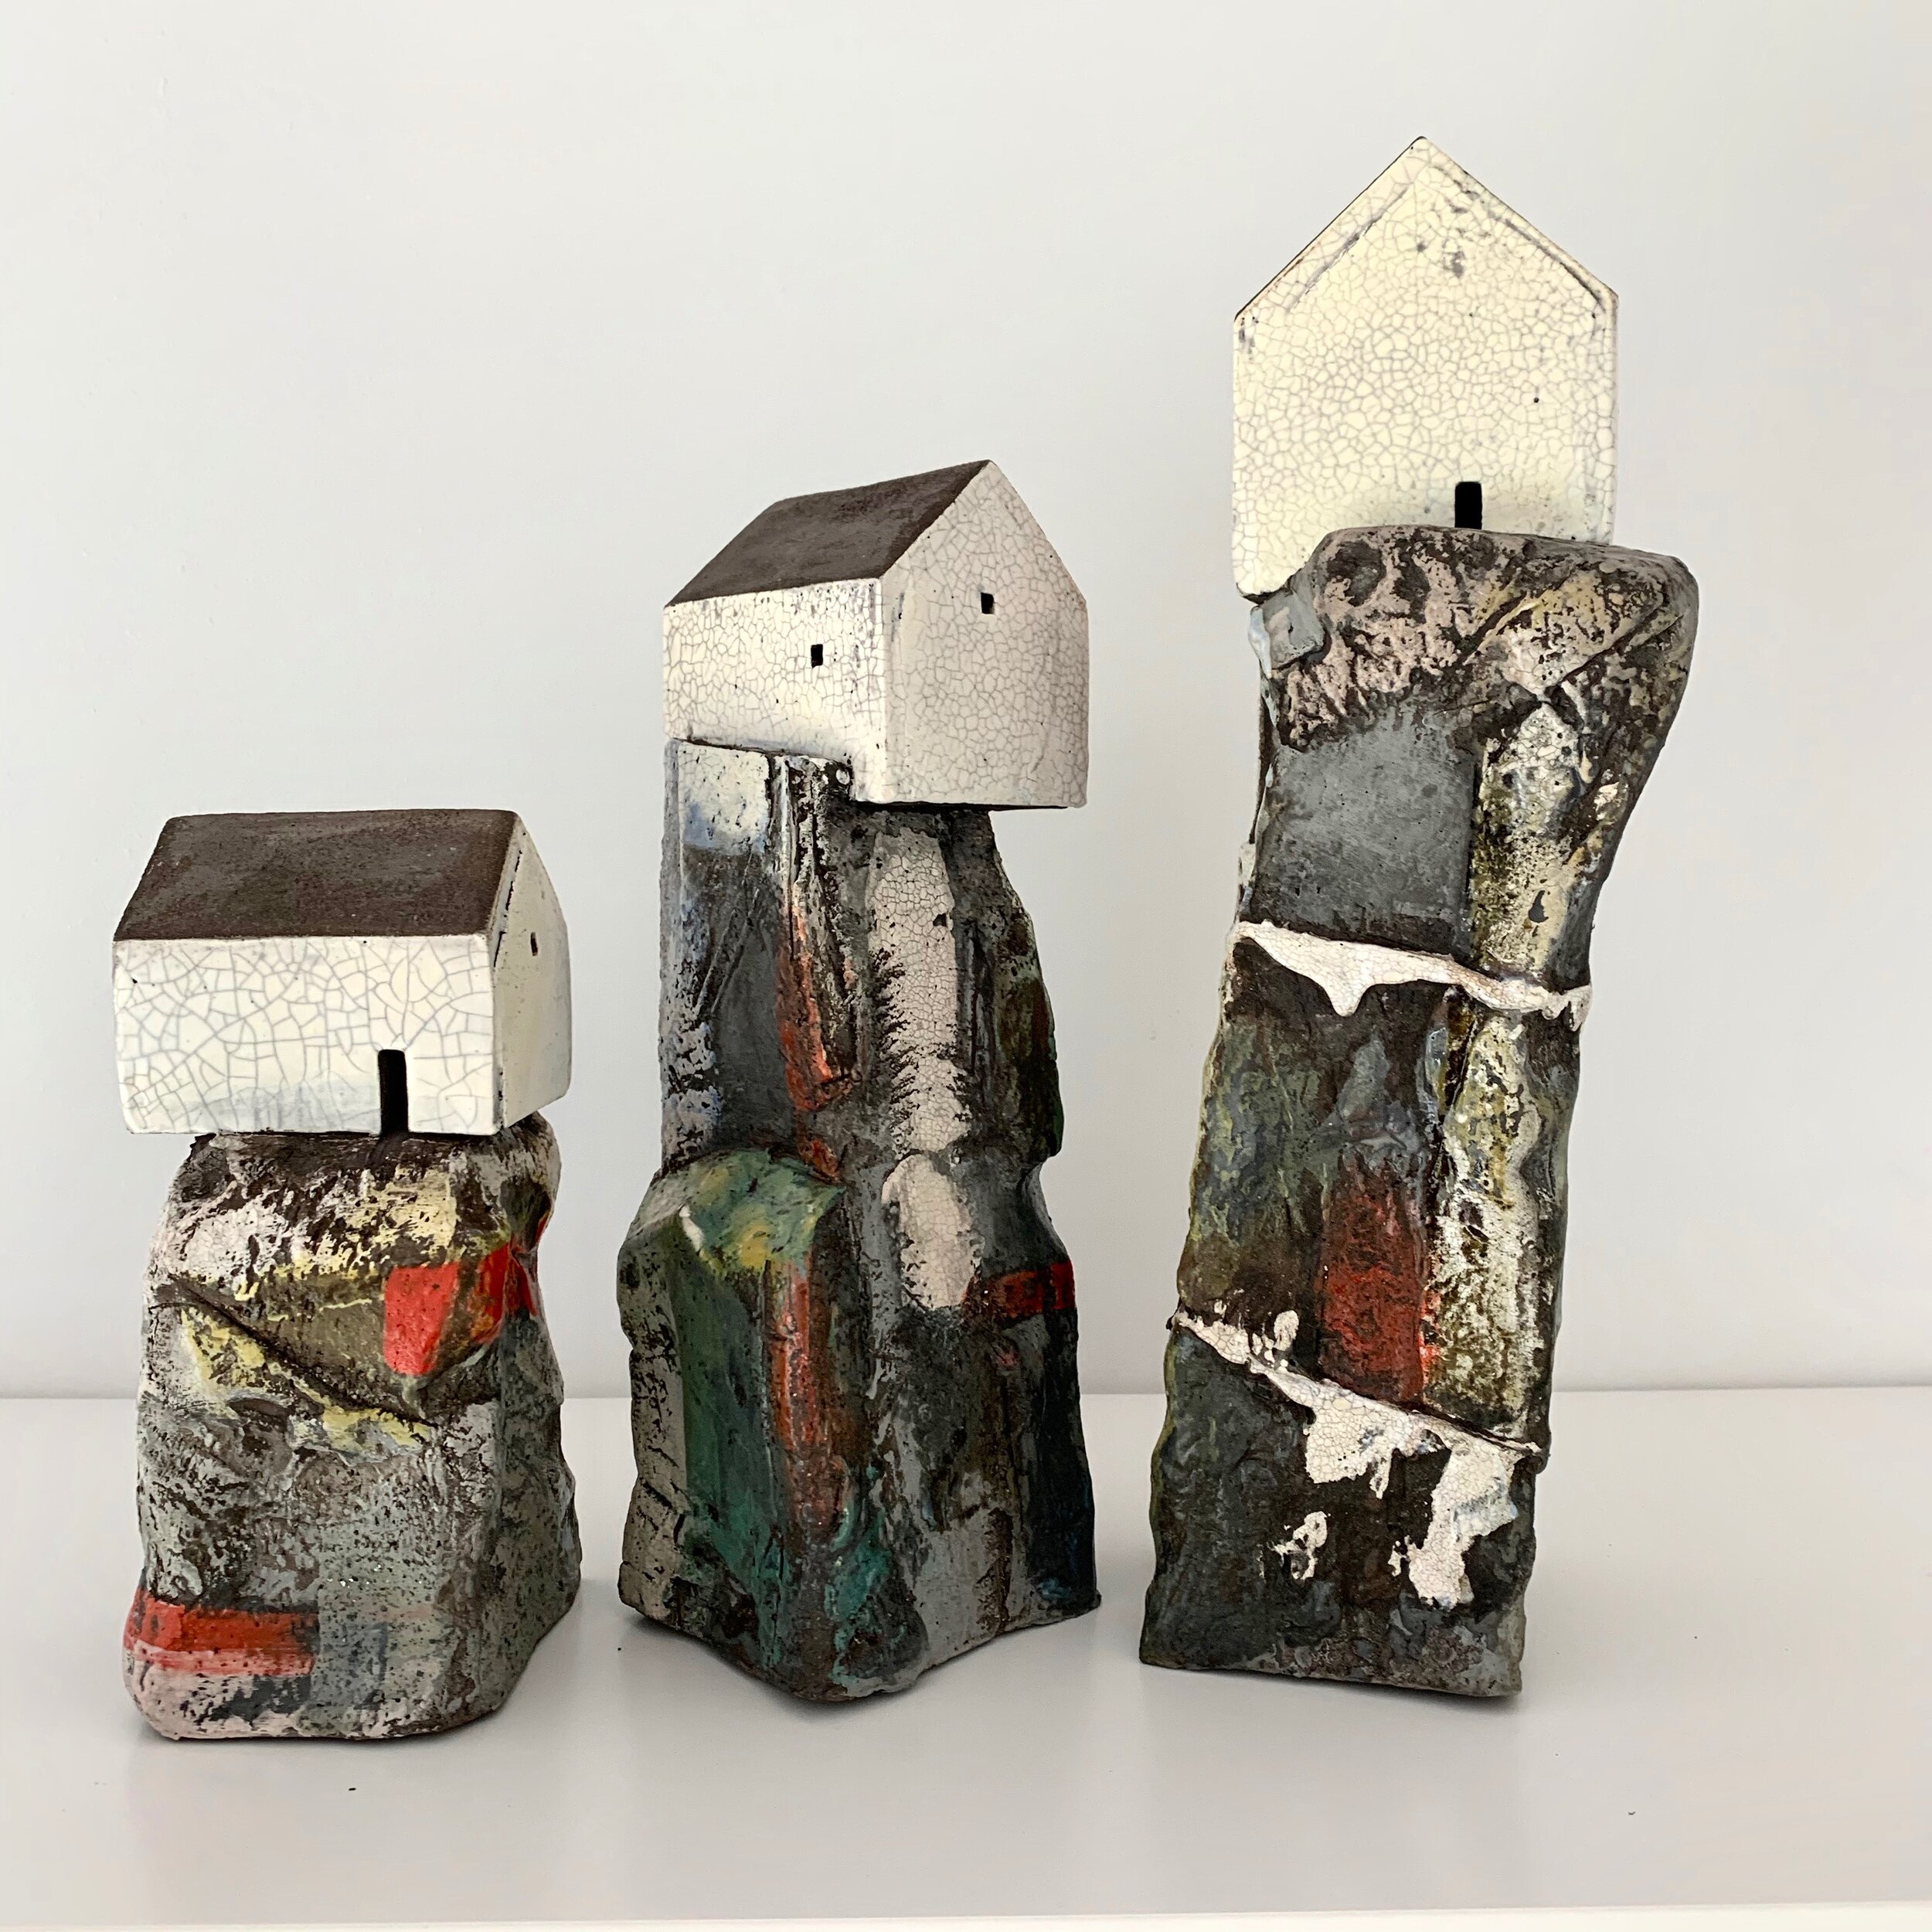 3 house on rock sculptures